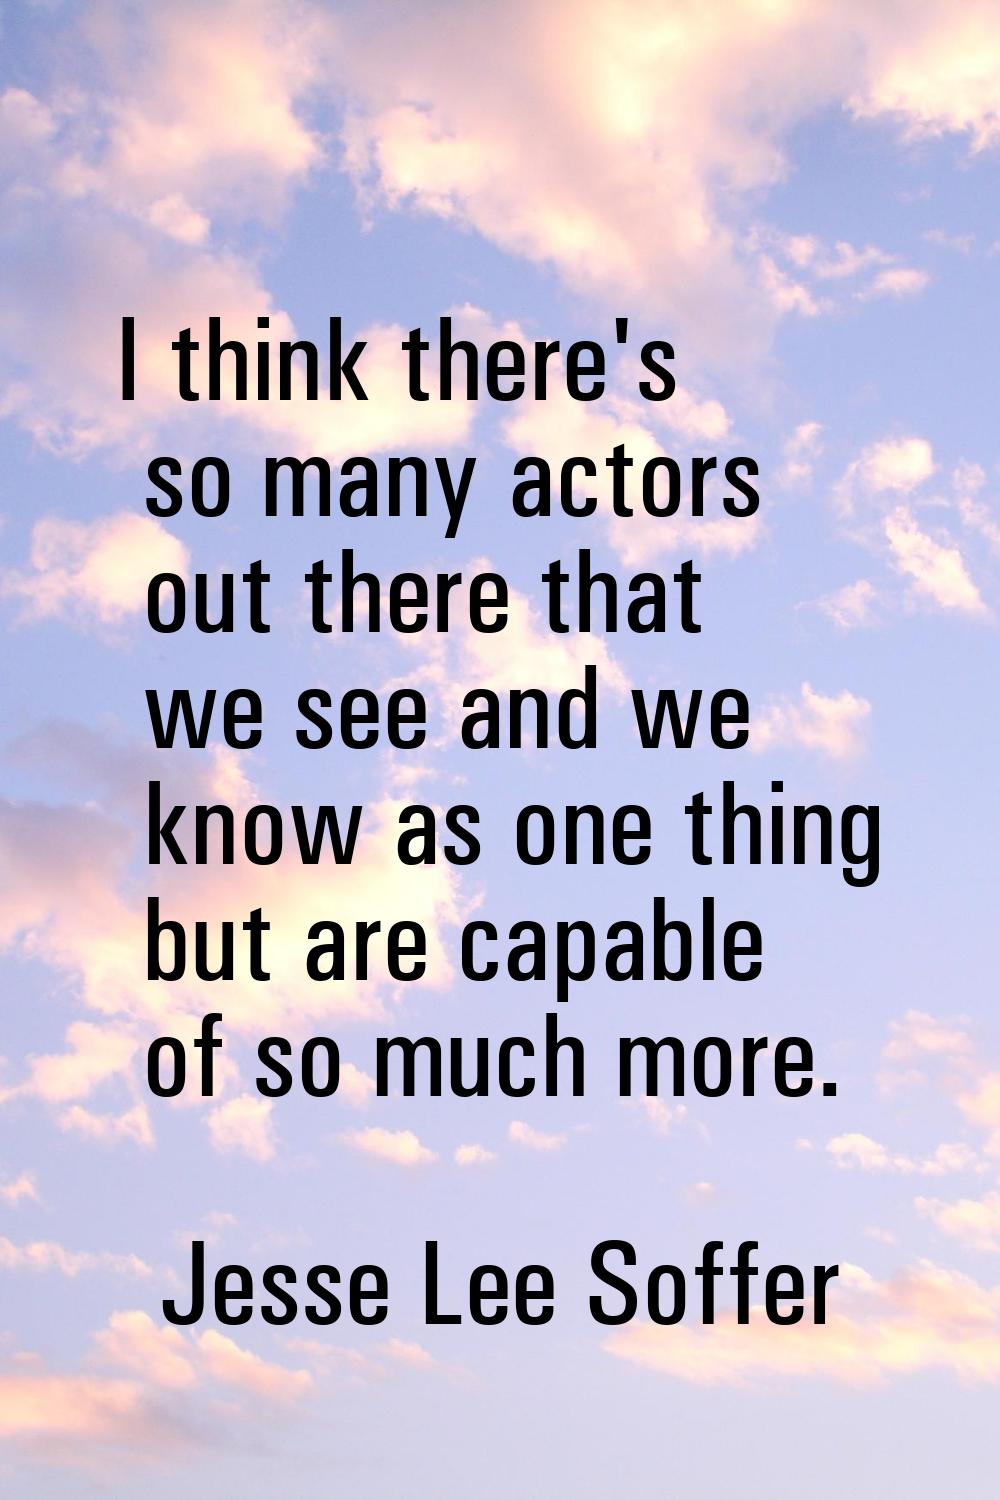 I think there's so many actors out there that we see and we know as one thing but are capable of so